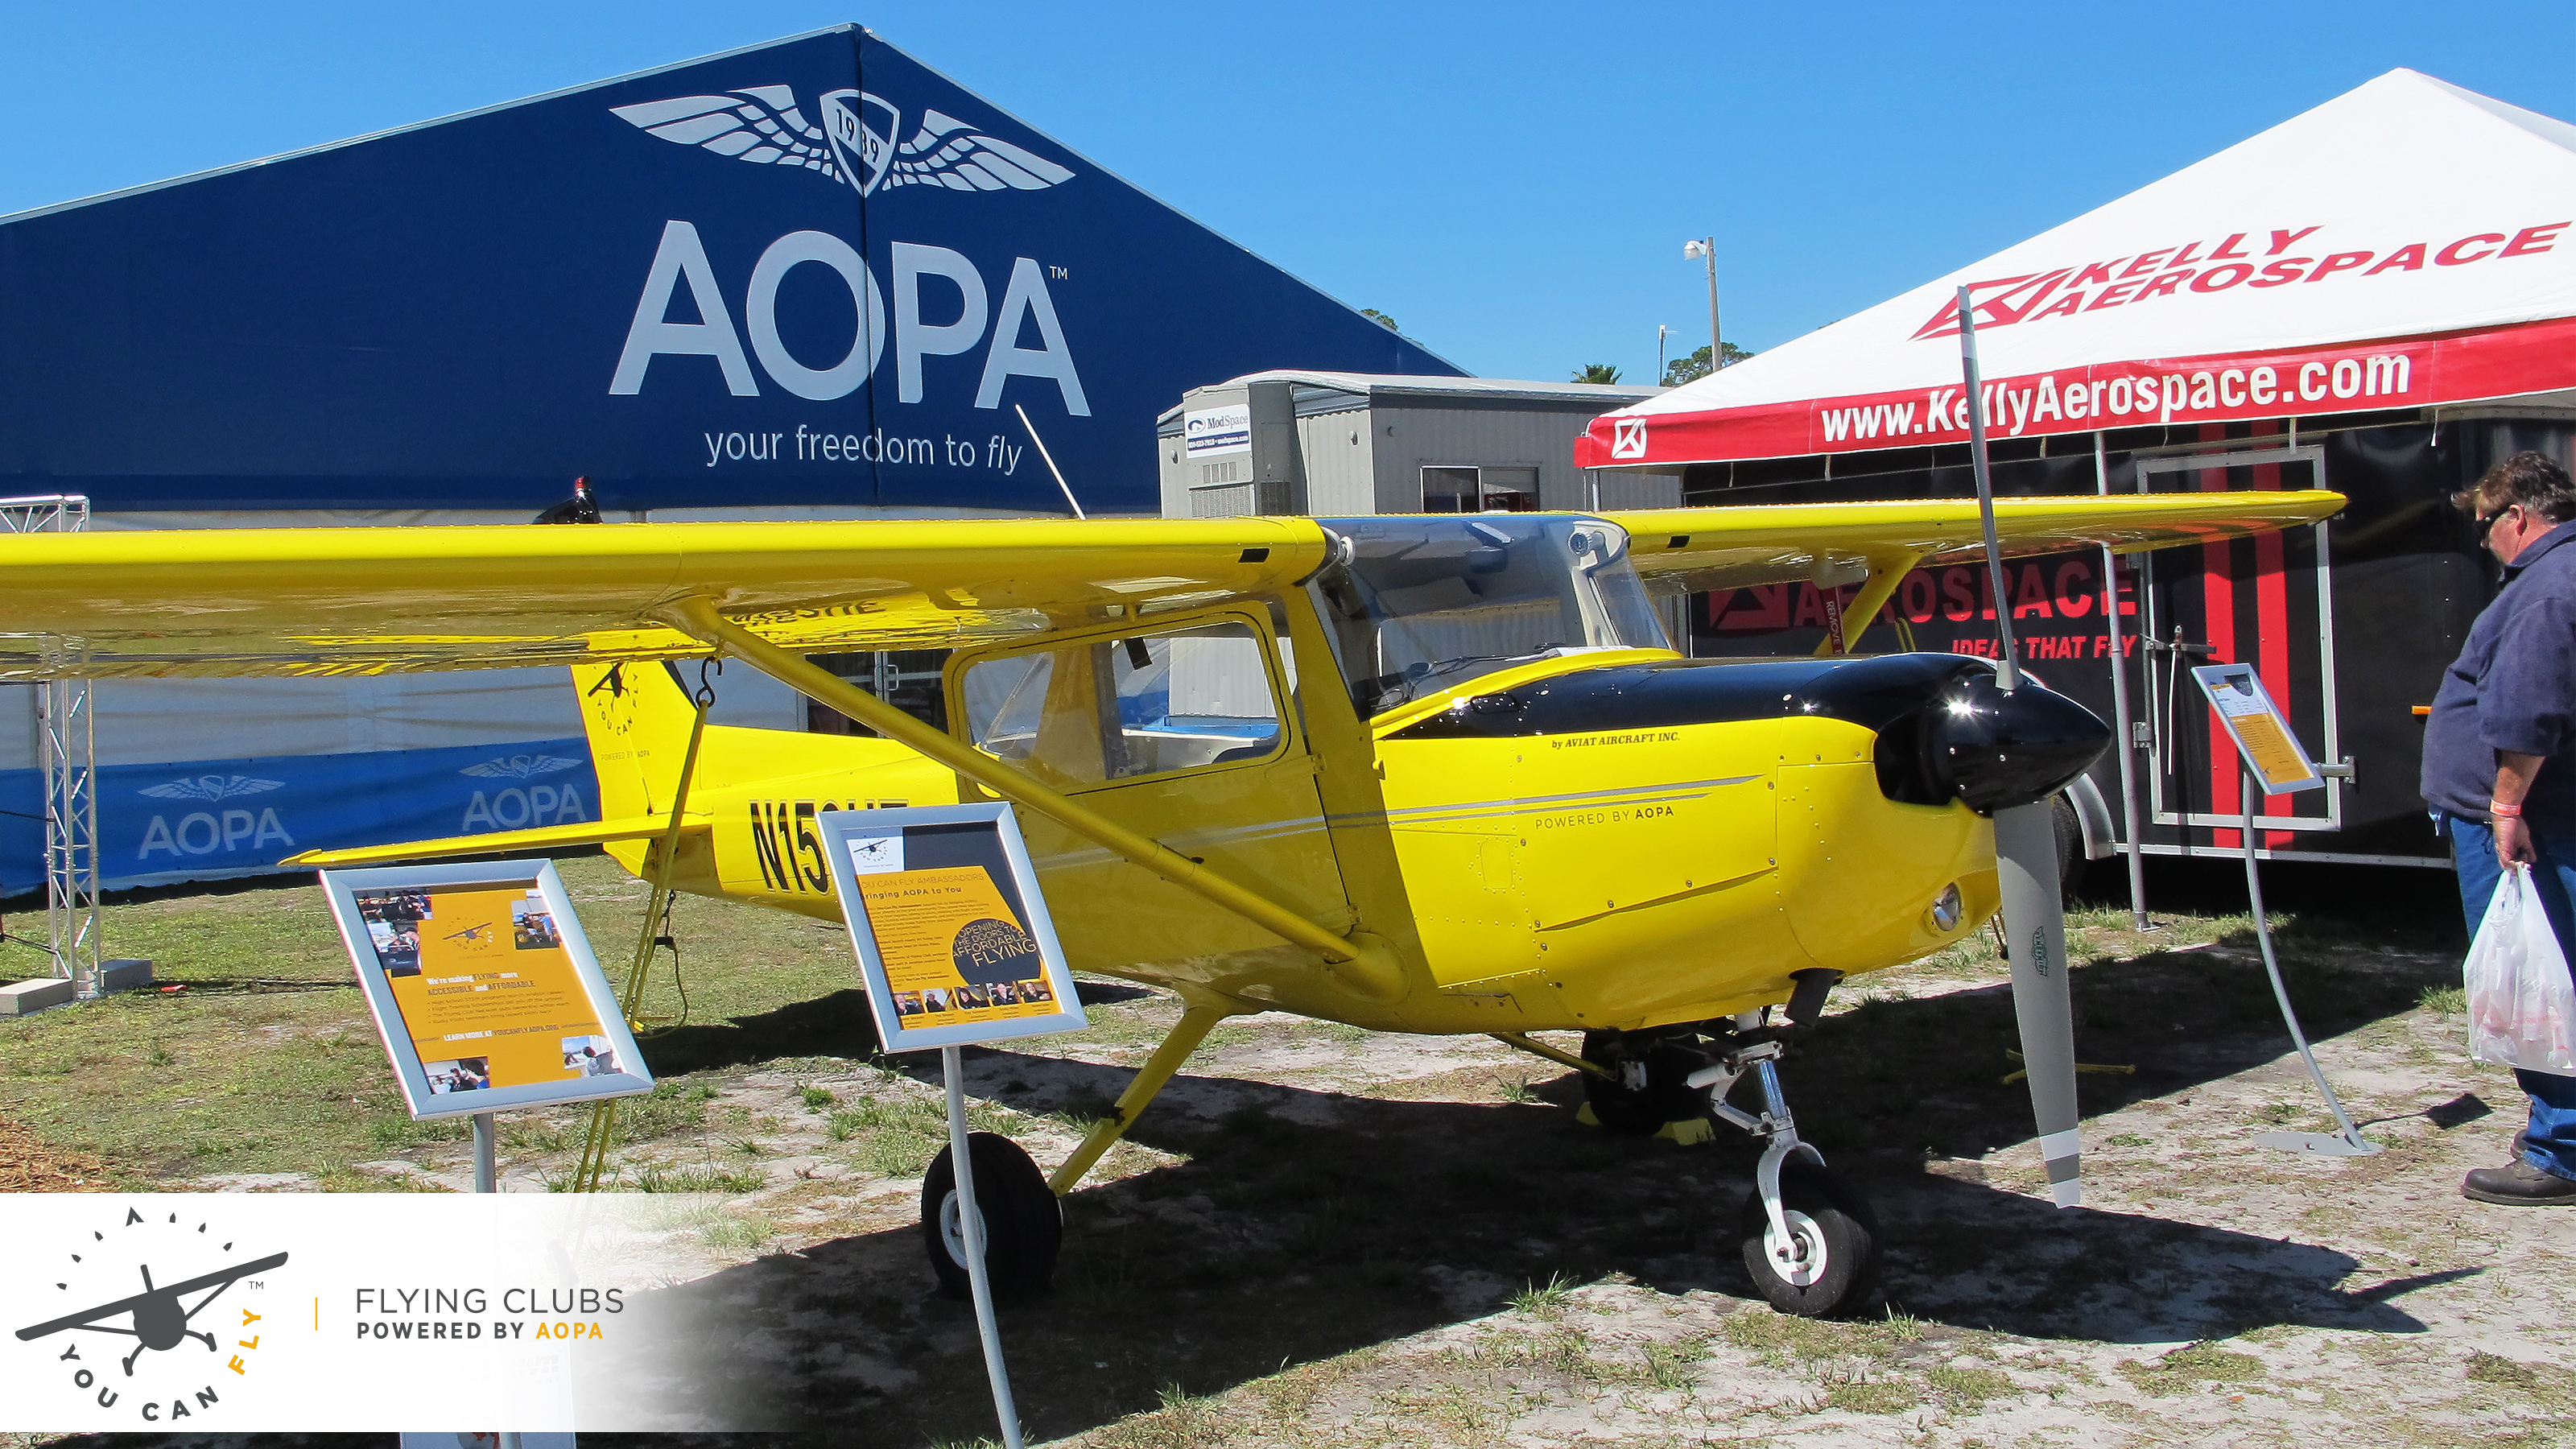 Pilots could learn about the AOPA Reimagined 150/152s and the AOPA Flying Club Network at Sun 'n Fun. The association also hosted a social for those interested in or already part of a flying club. Photo by Alyssa J. Miller.